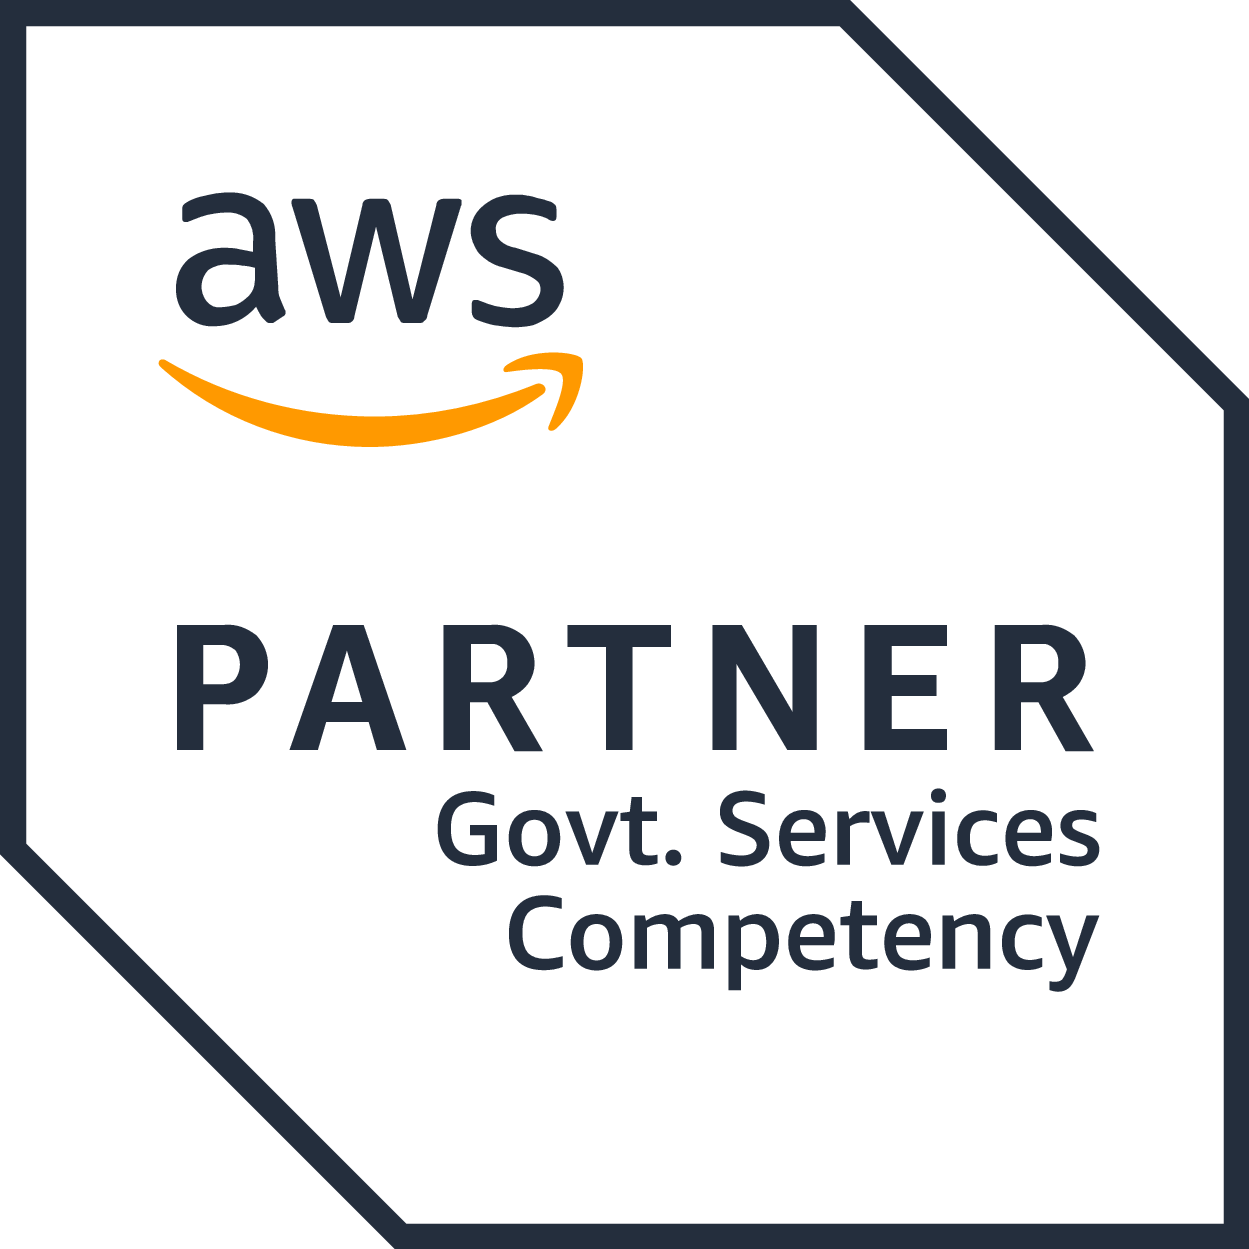 AWS Government Competency Consulting partner